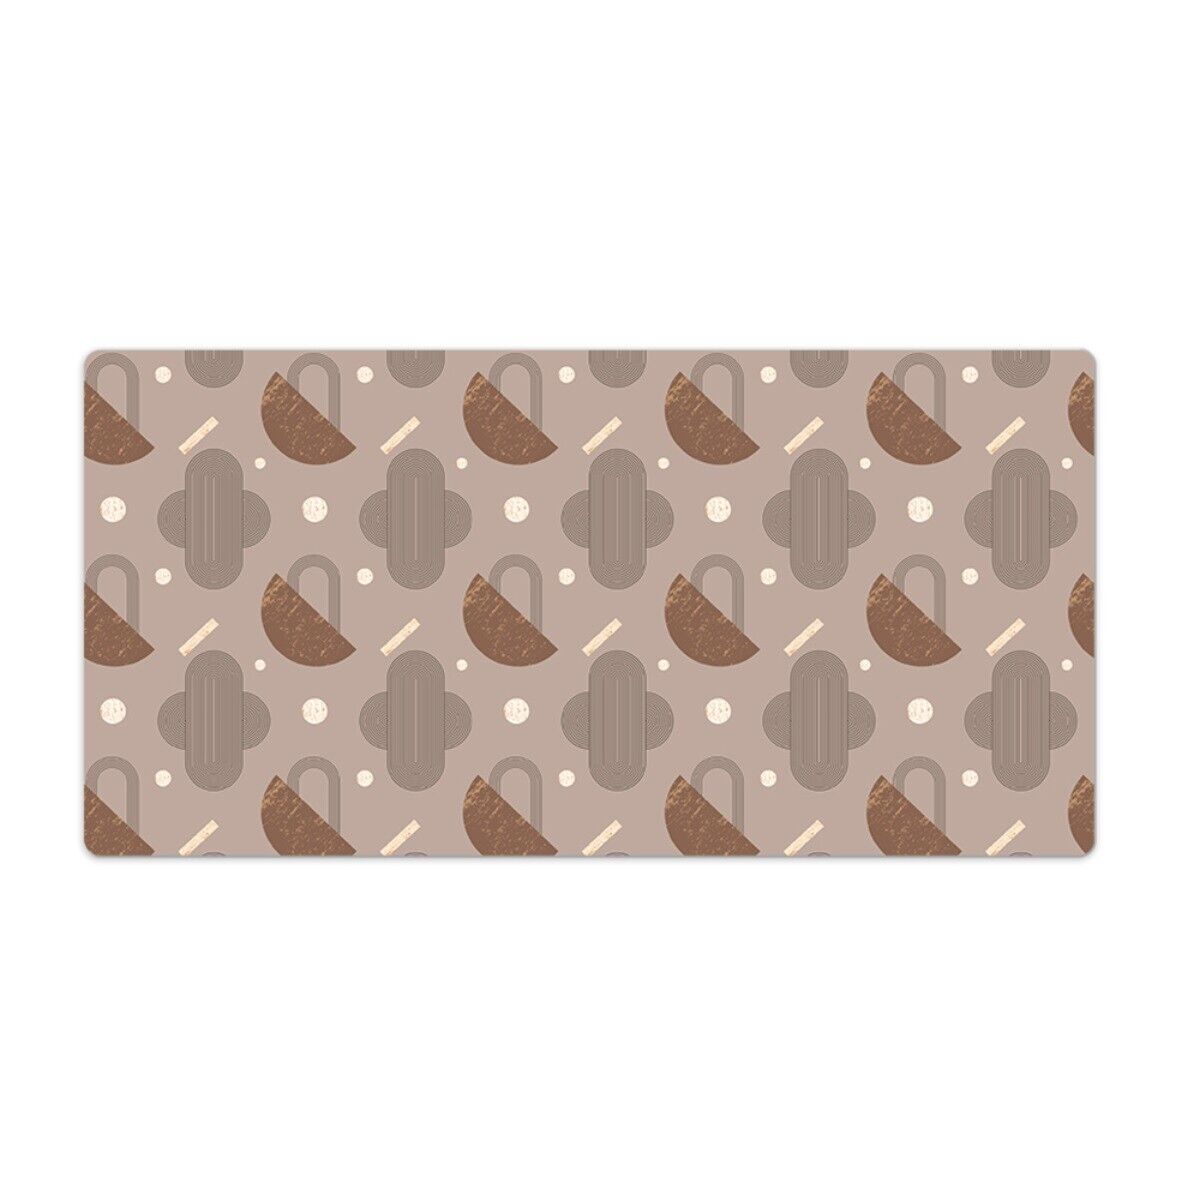 Decoration Mouse Pad Desk Mat for Home Office Abstract pattern 100x50